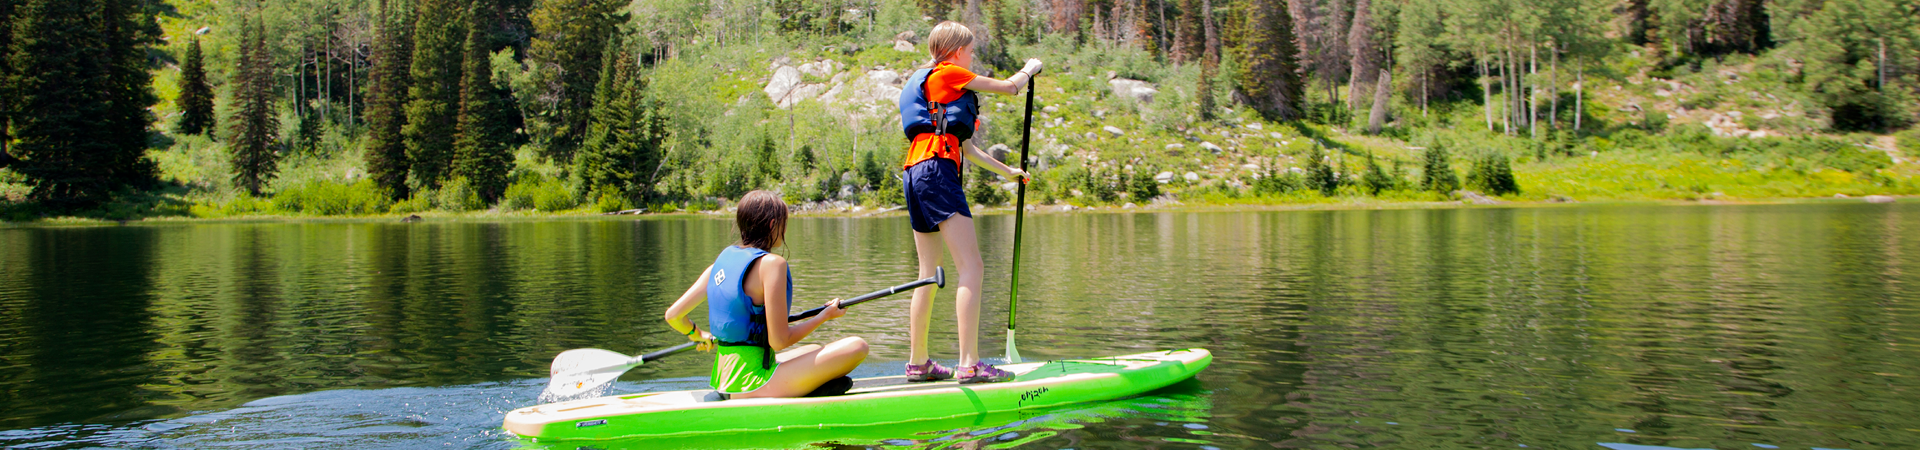 Two Girl Scouts on a paddle board in a lake